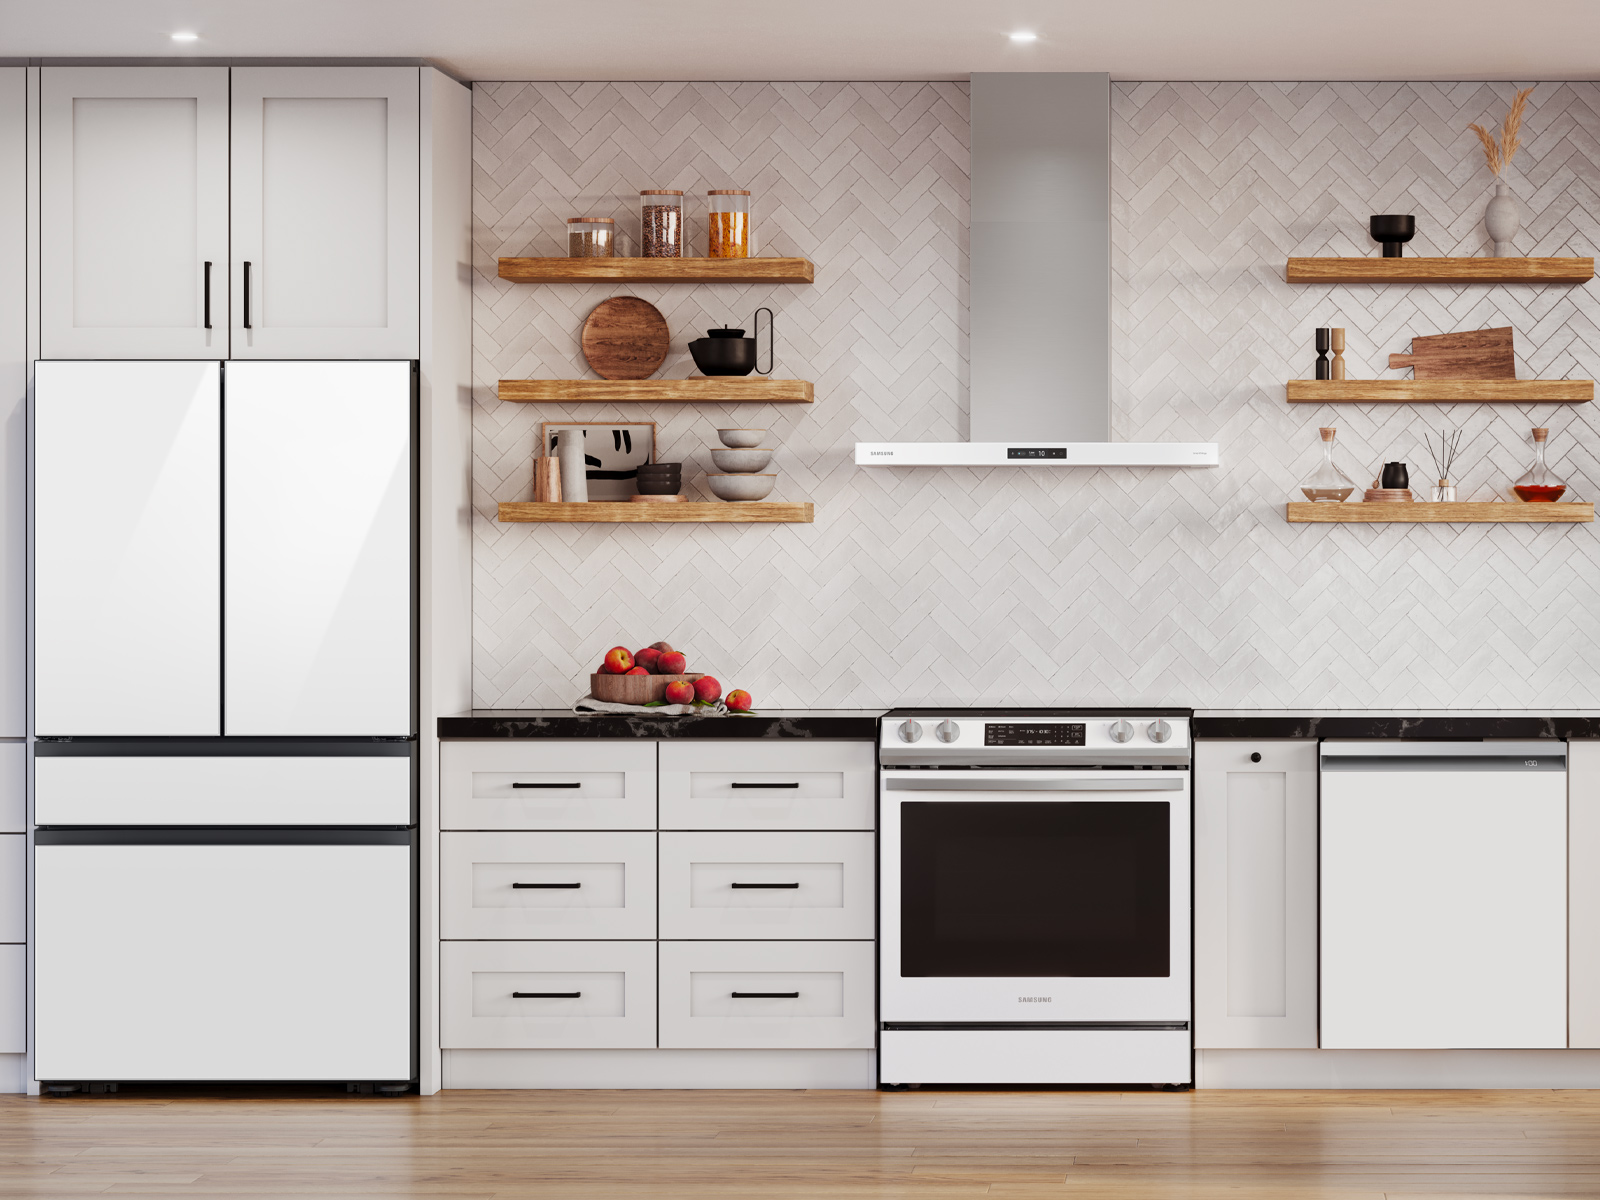 https://image-us.samsung.com/SamsungUS/home/home-appliances/cooktops-and-hoods/hoods/nk36cb700w12aa/gallery/NK36CB700W12_05_Clean_White_SCOM.jpg?$product-details-jpg$